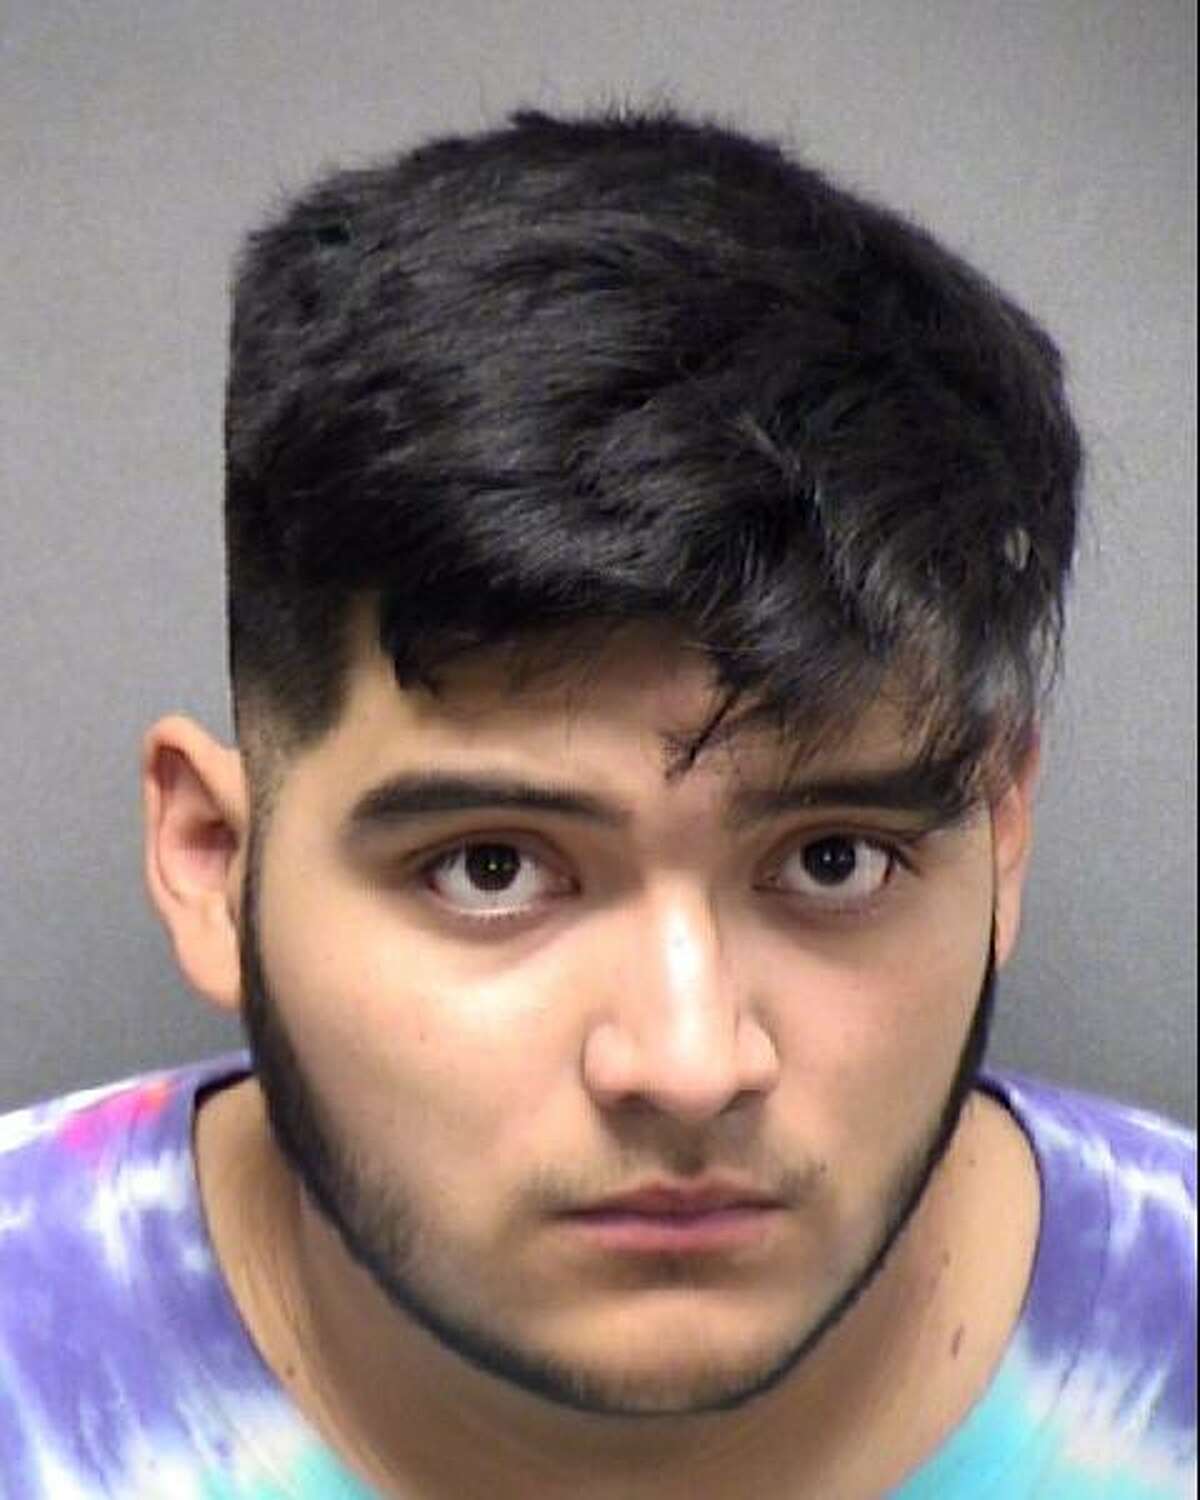 Esteban Zamarripa has been charged with murder and evading arrest.